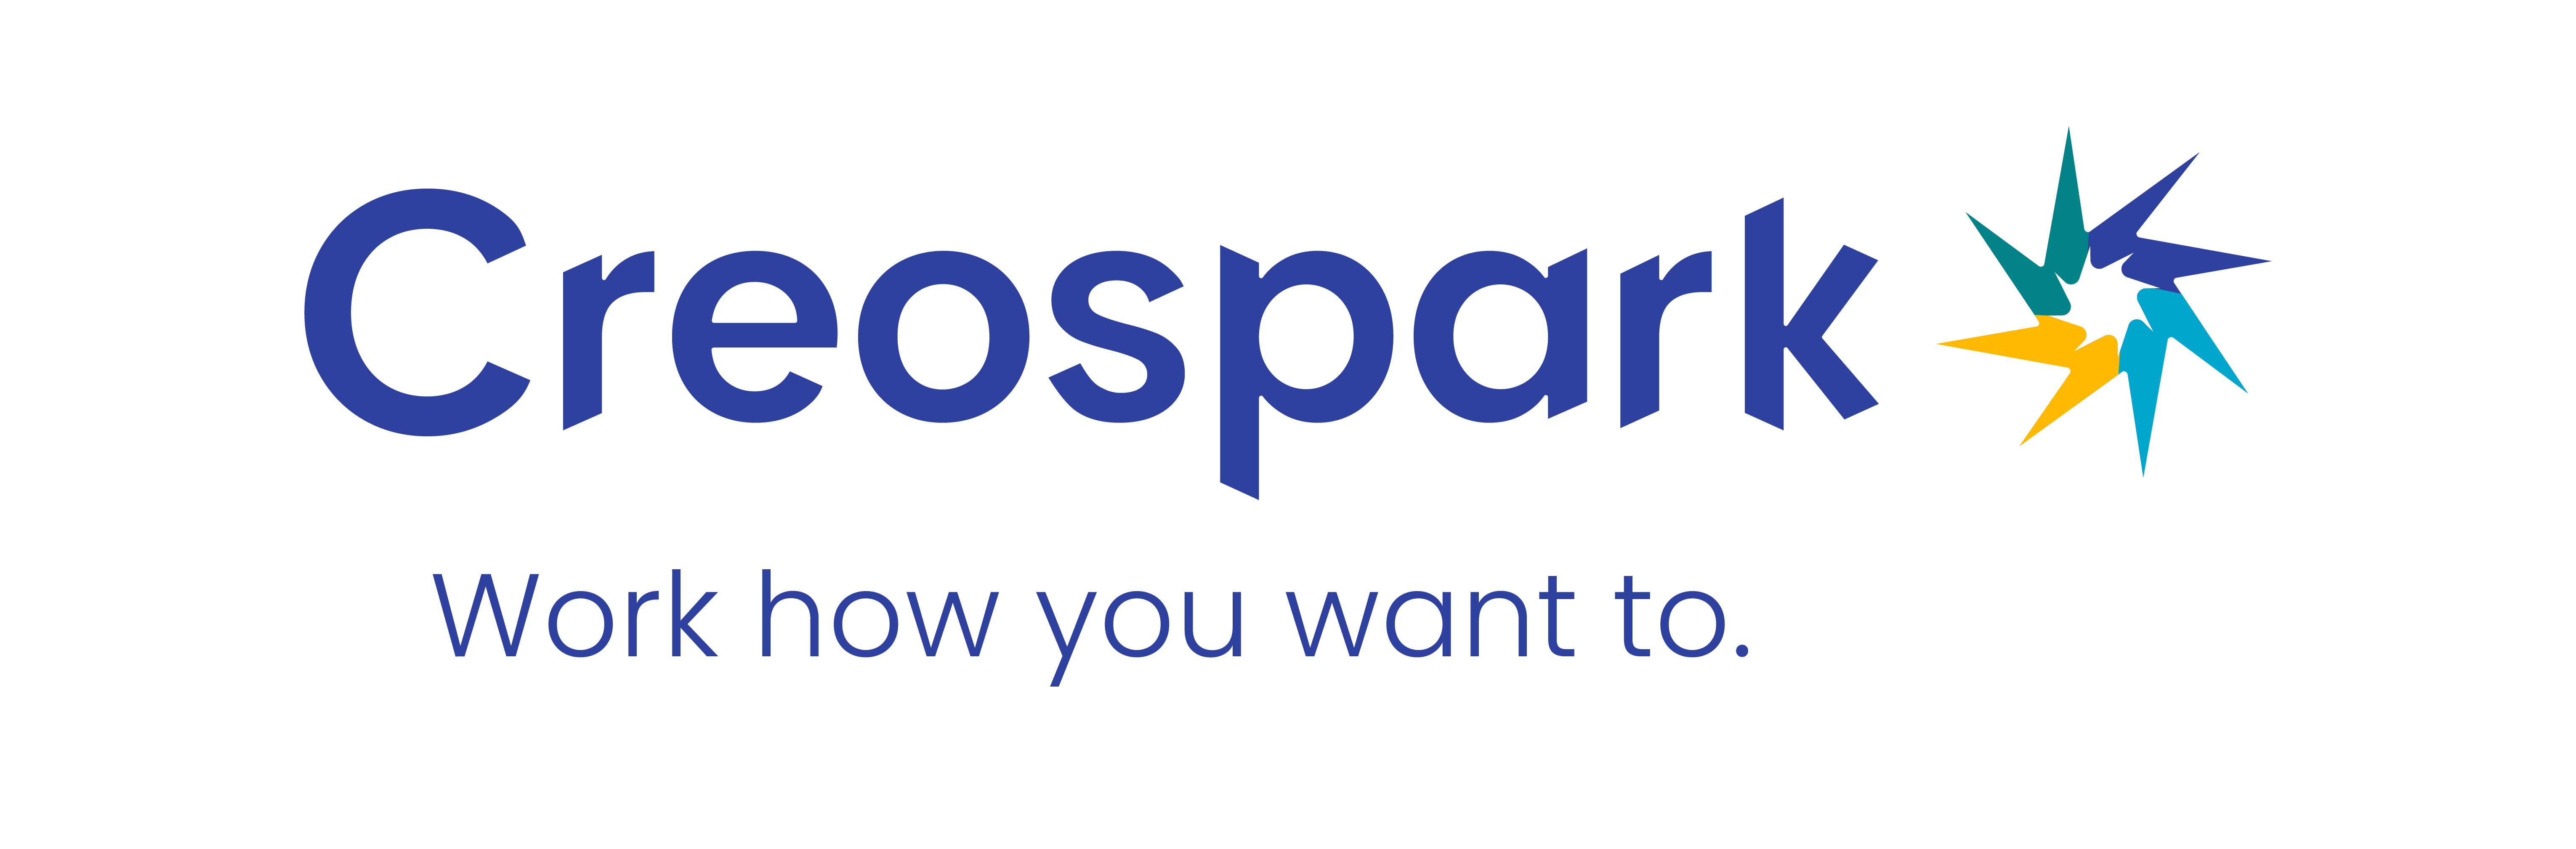 Creospark - IT, business transformation and cloud consulting